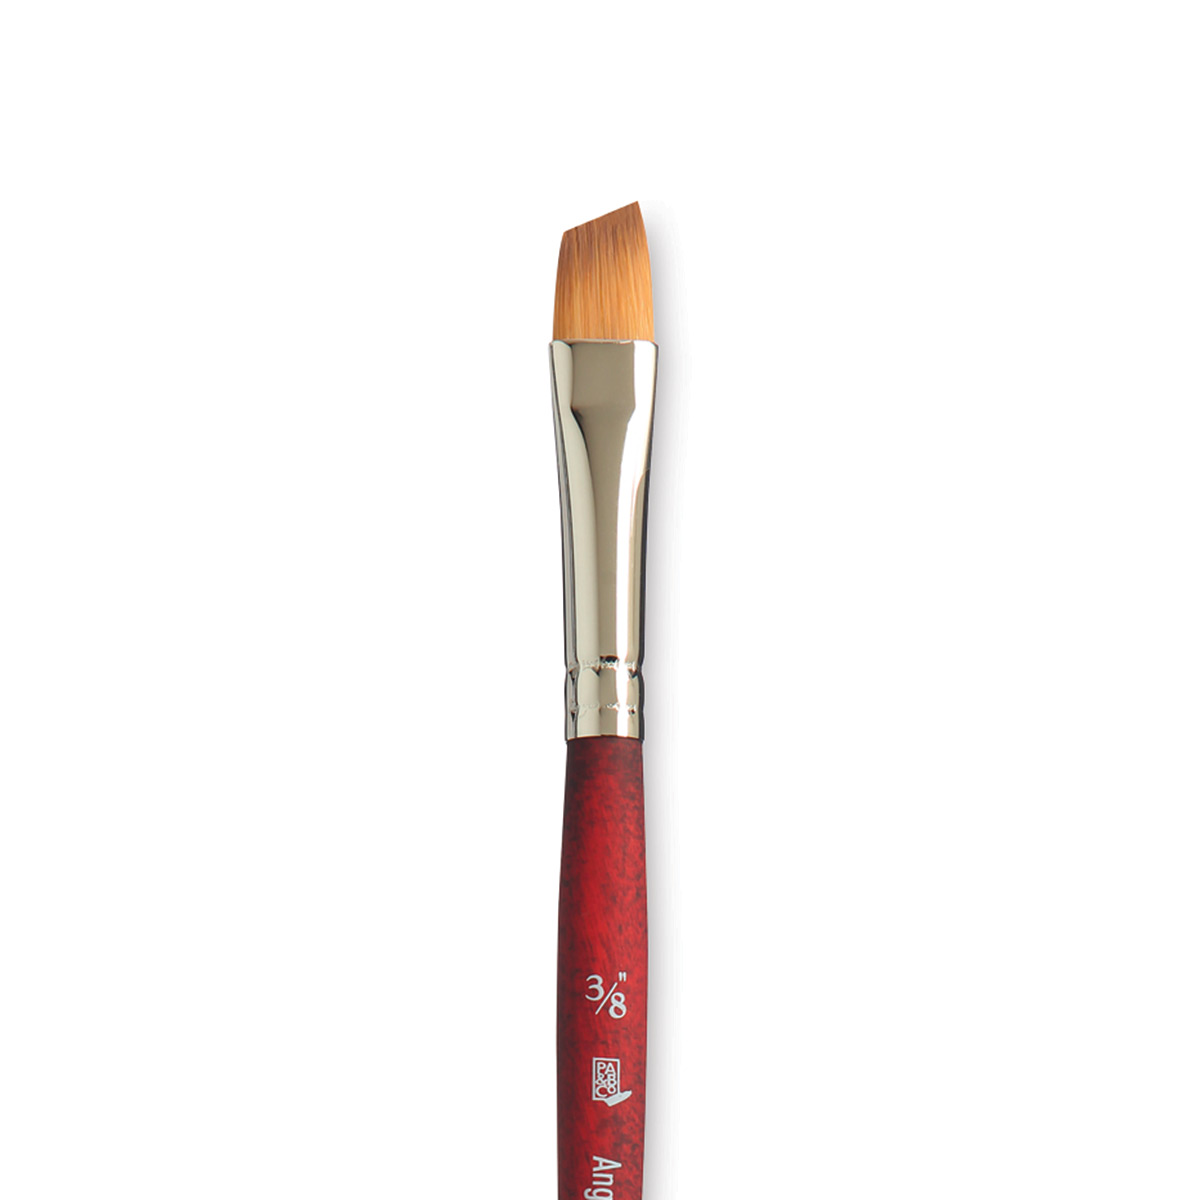 Velvetouch Stroke Series by Princeton Brush - Brushes and More